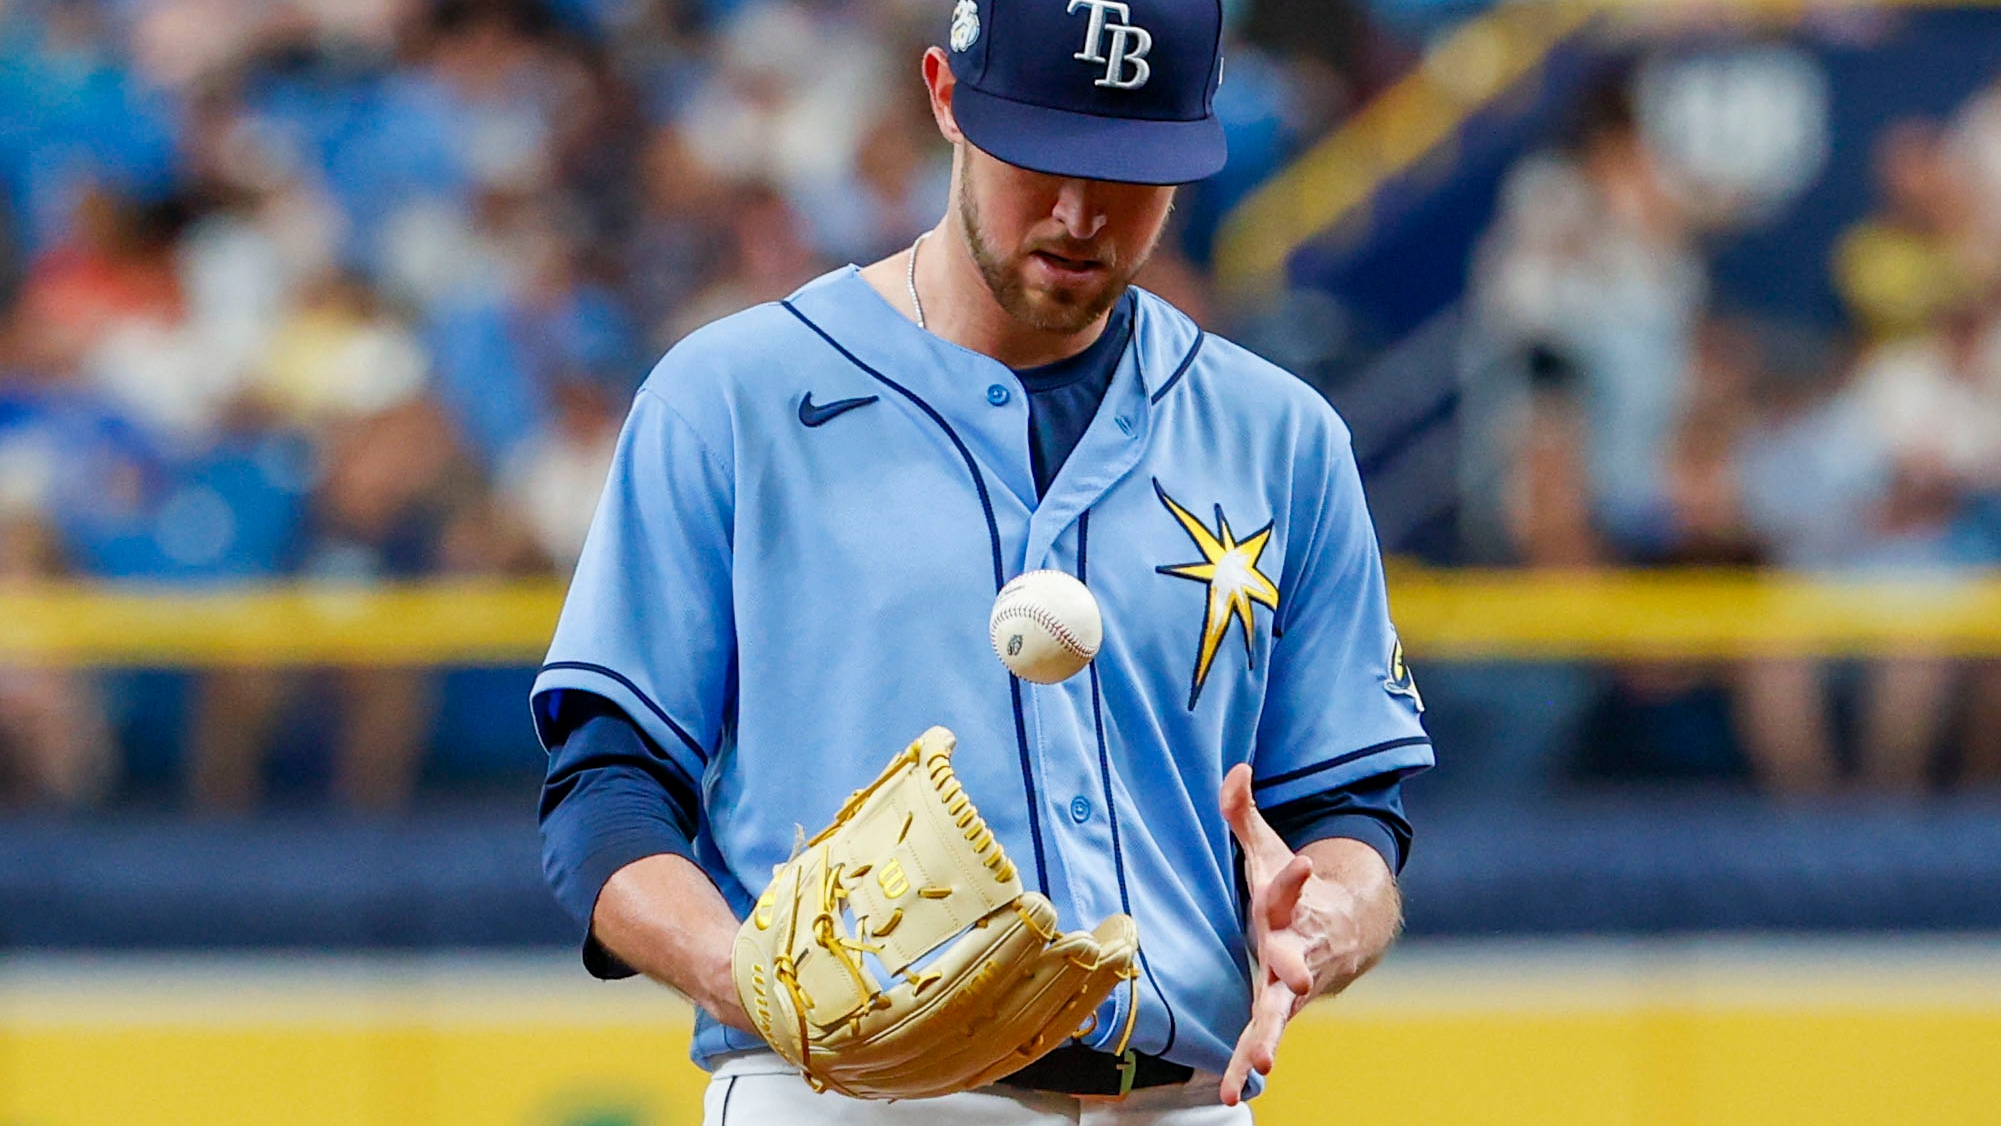 It's all coming together for 'electric' Tampa Bay Rays pitching